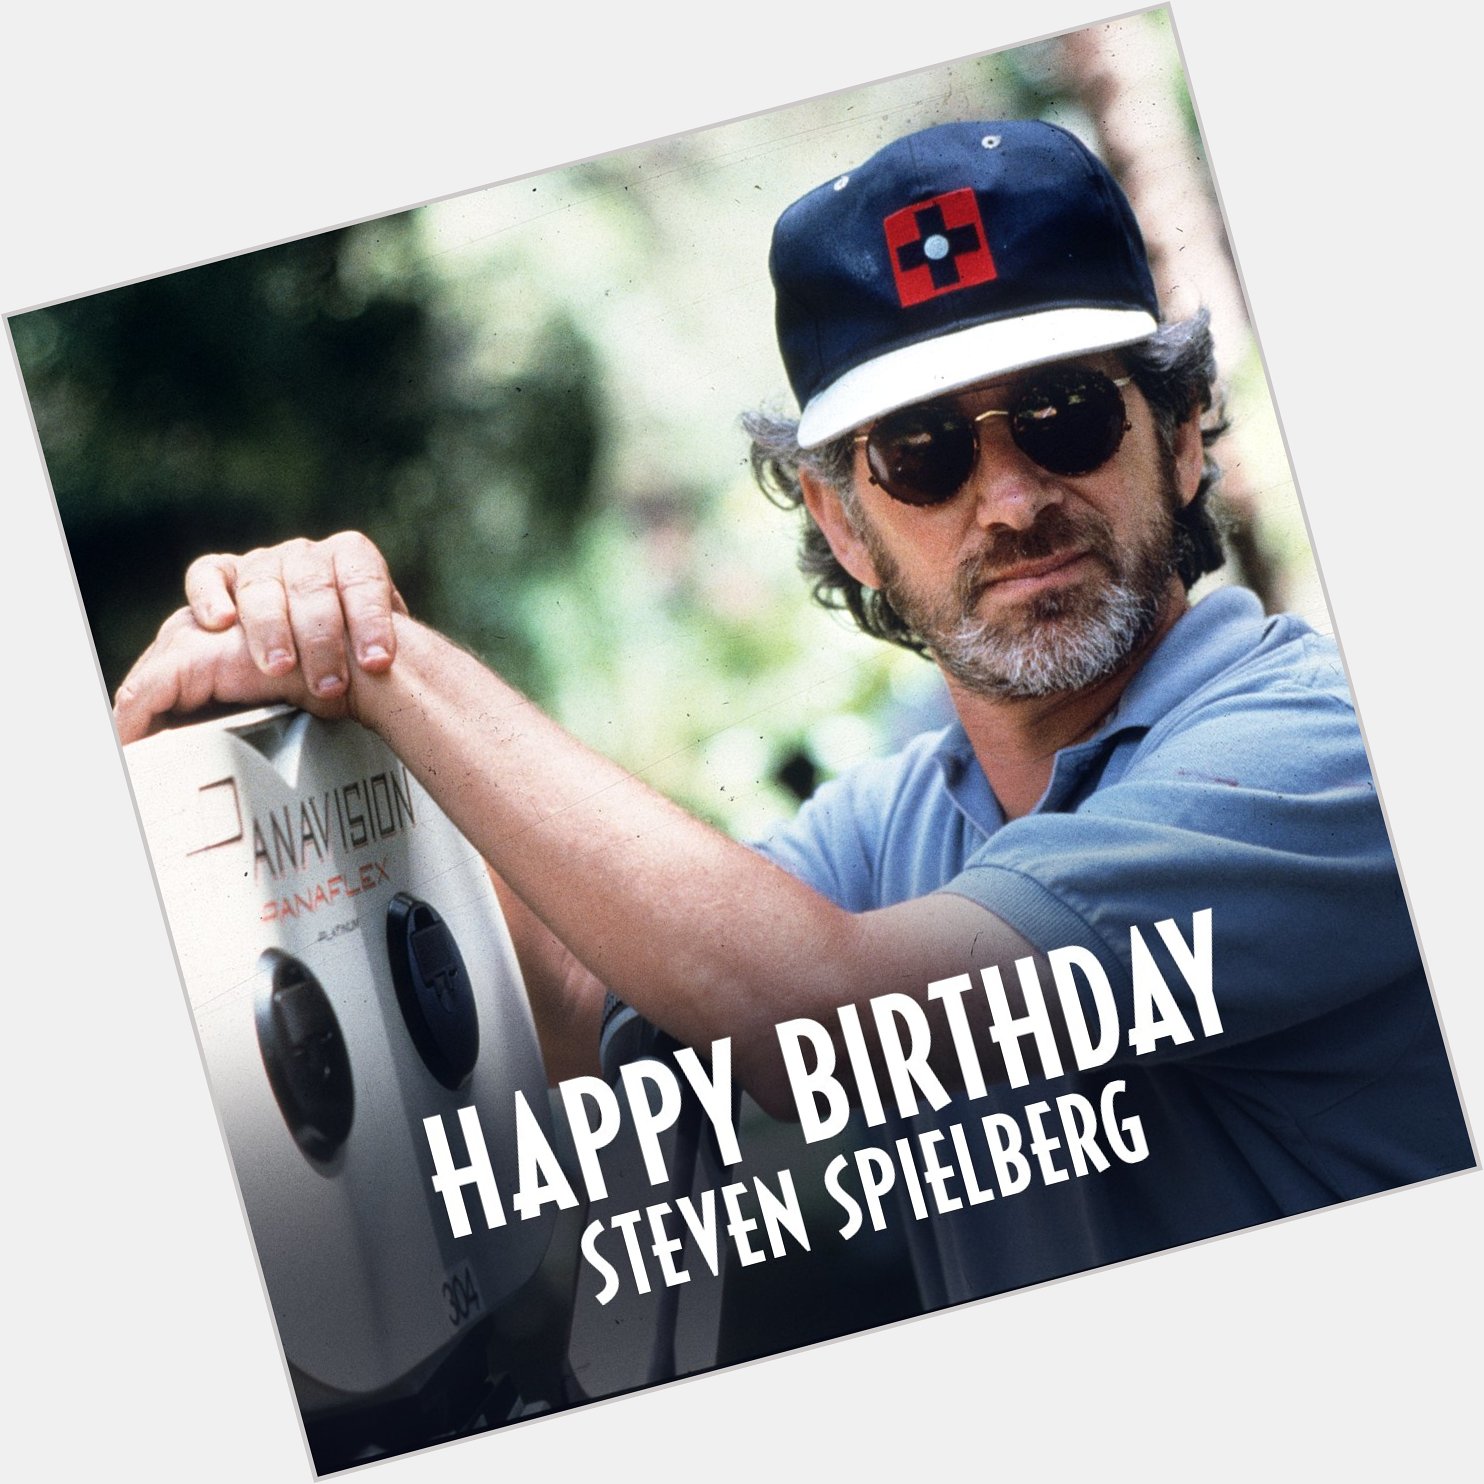 Happy birthday to the one and only, Steven Spielberg. 